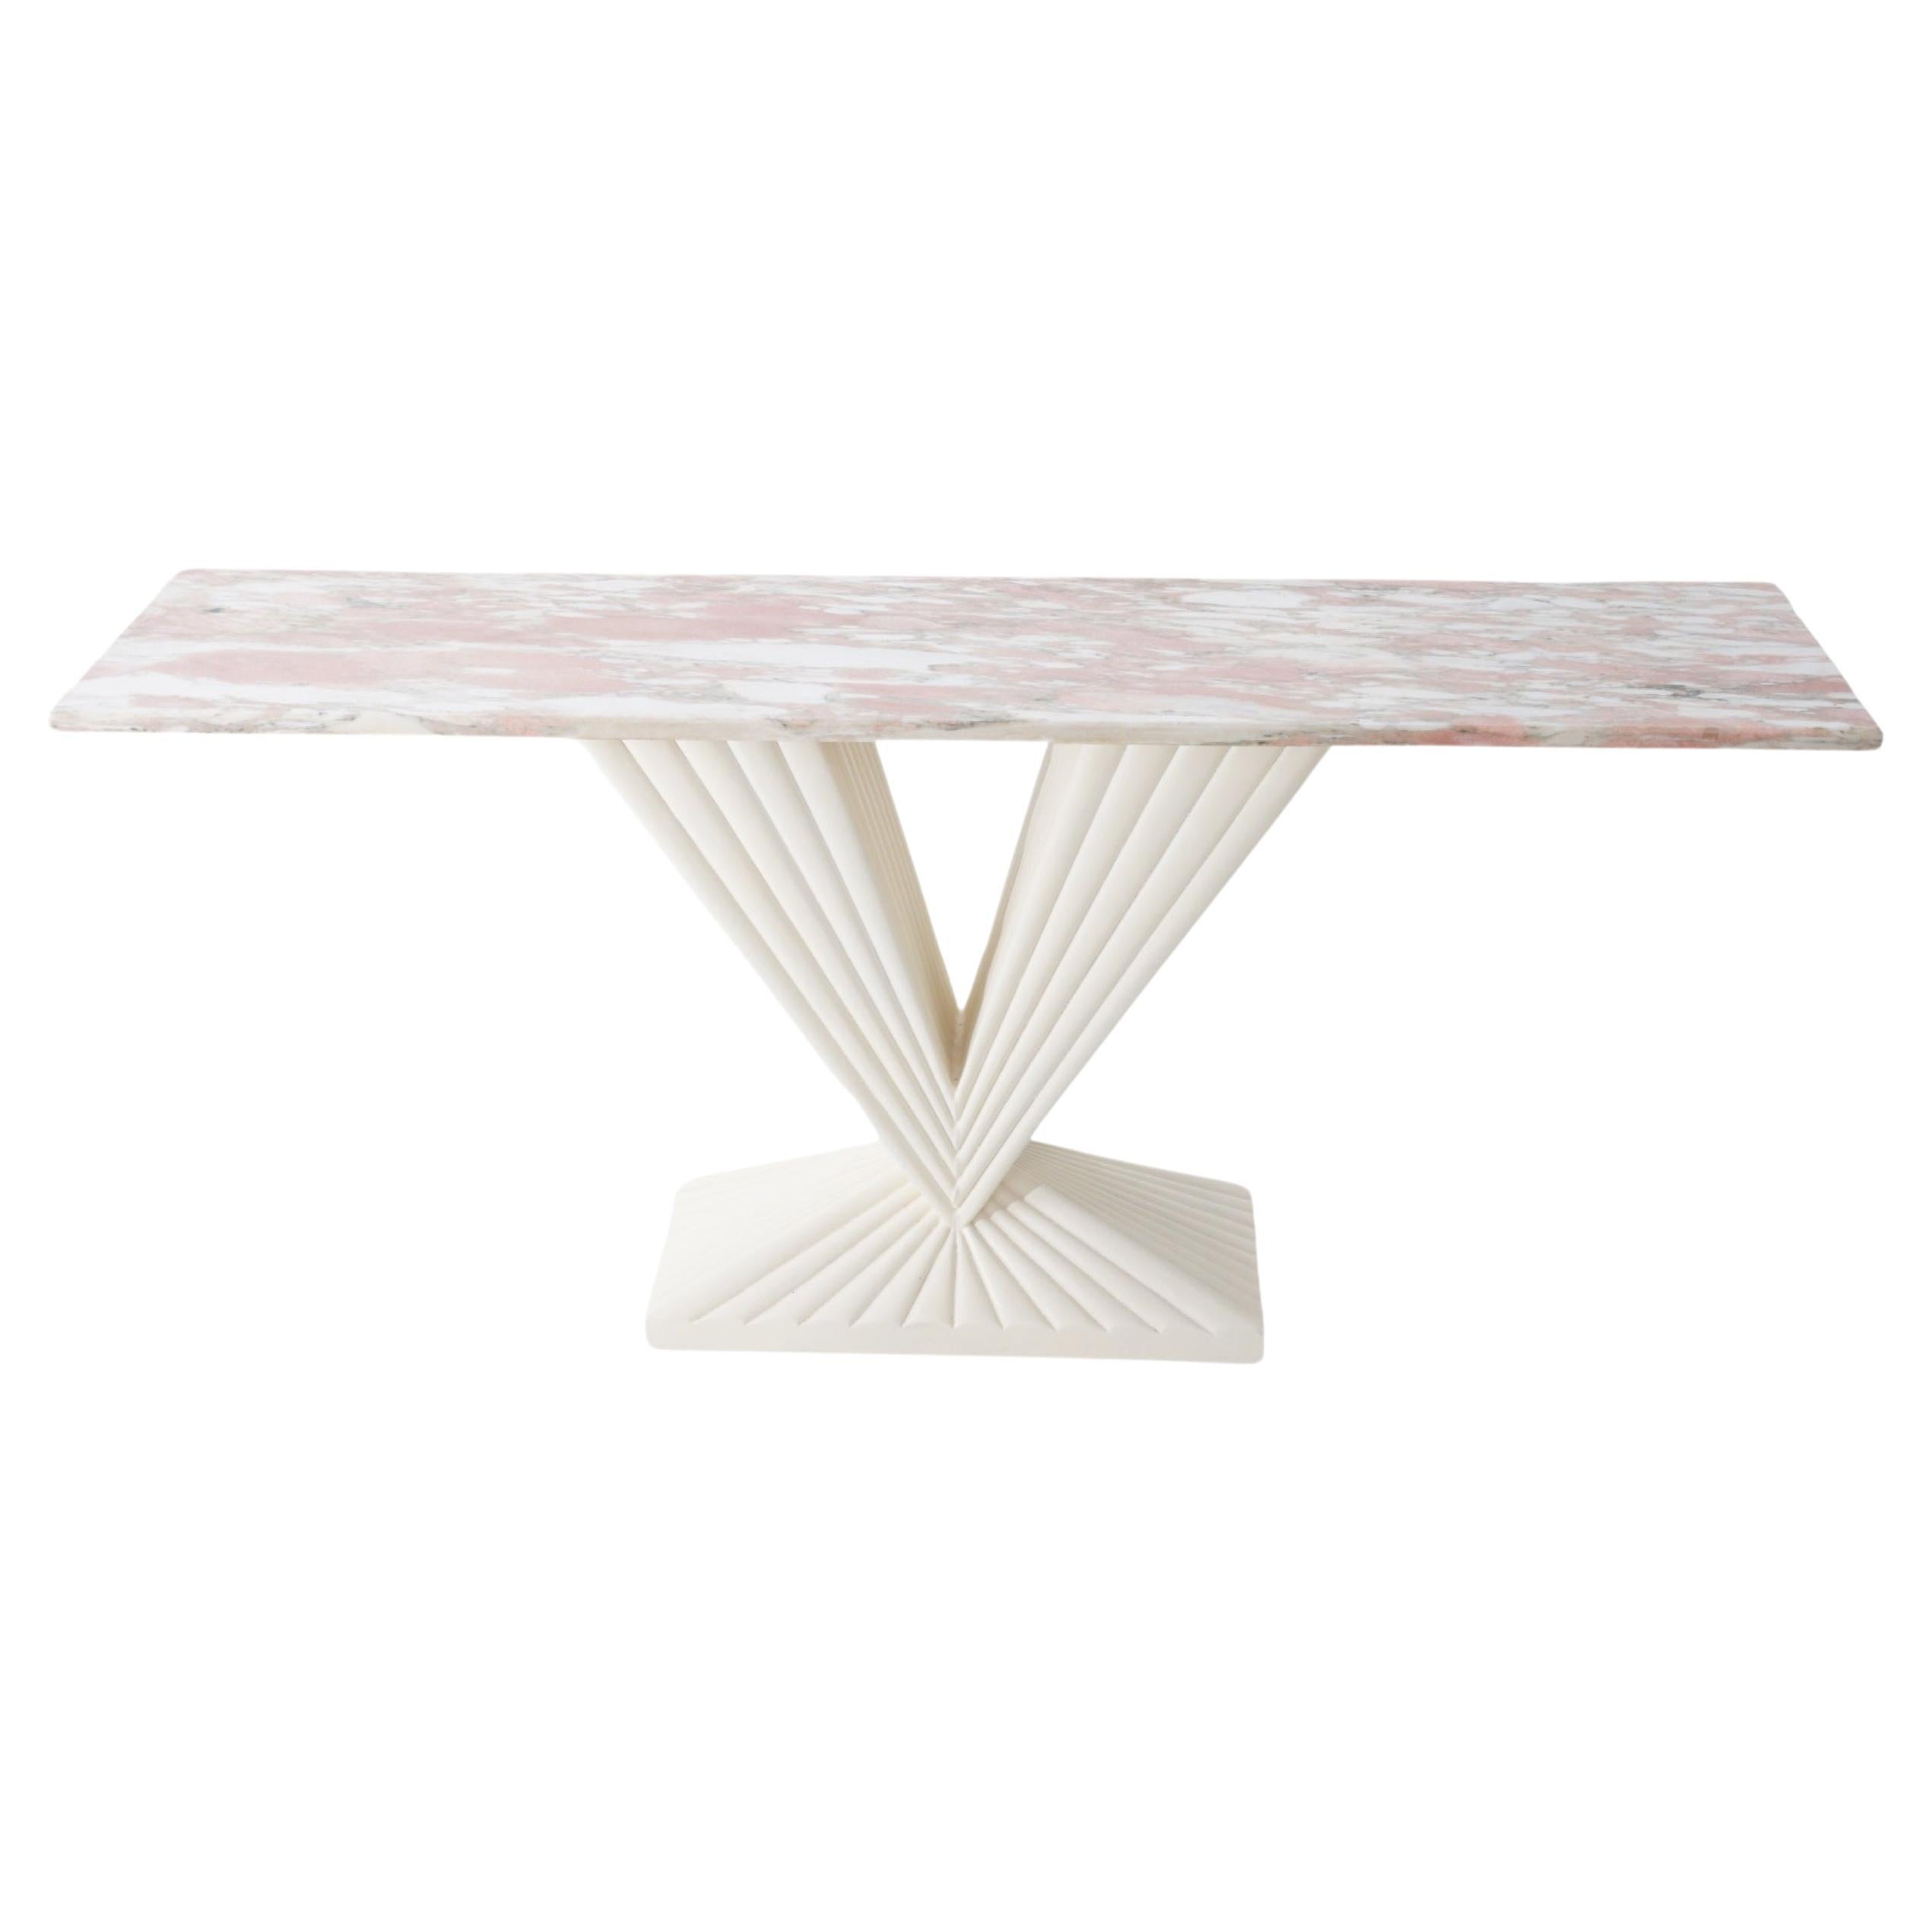 Pink Marble & Plaster Console, 1980s For Sale